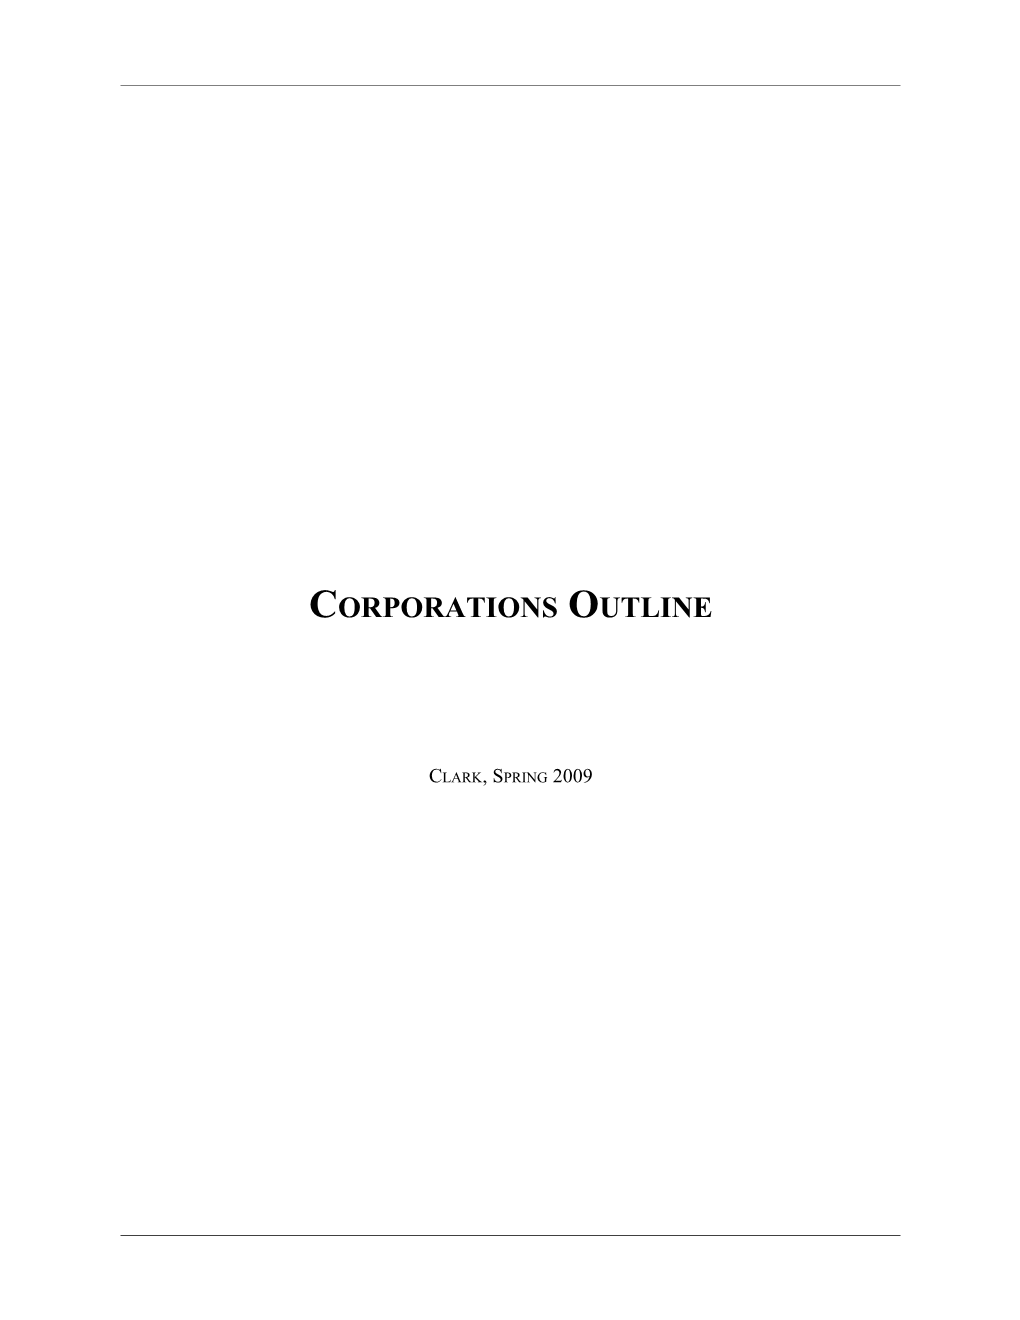 Corporations Outline s1